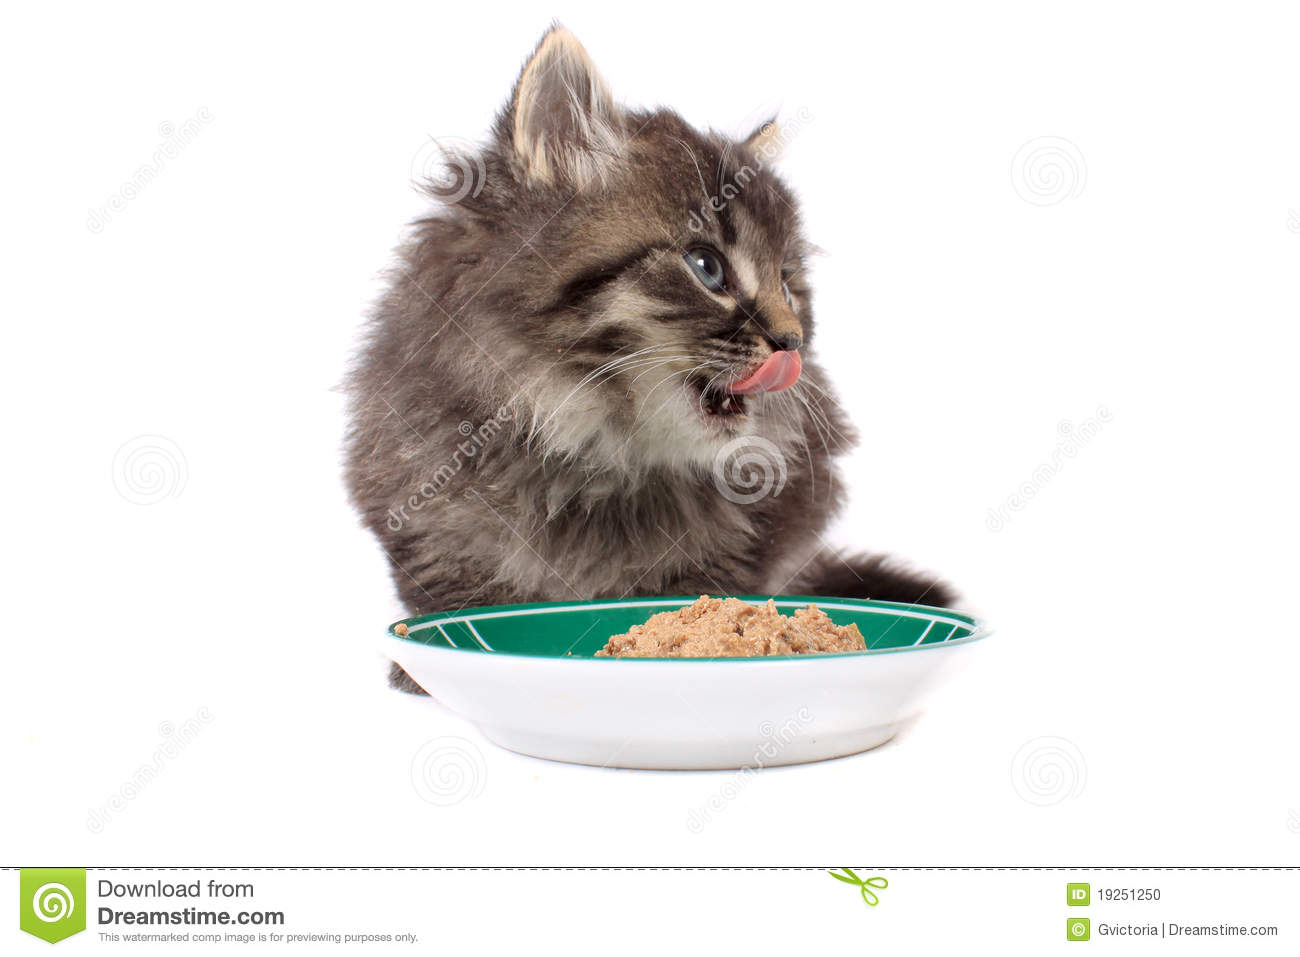 Blue Eyes Licking His Chops From Eating Soft Cat Foof In A Dish On A